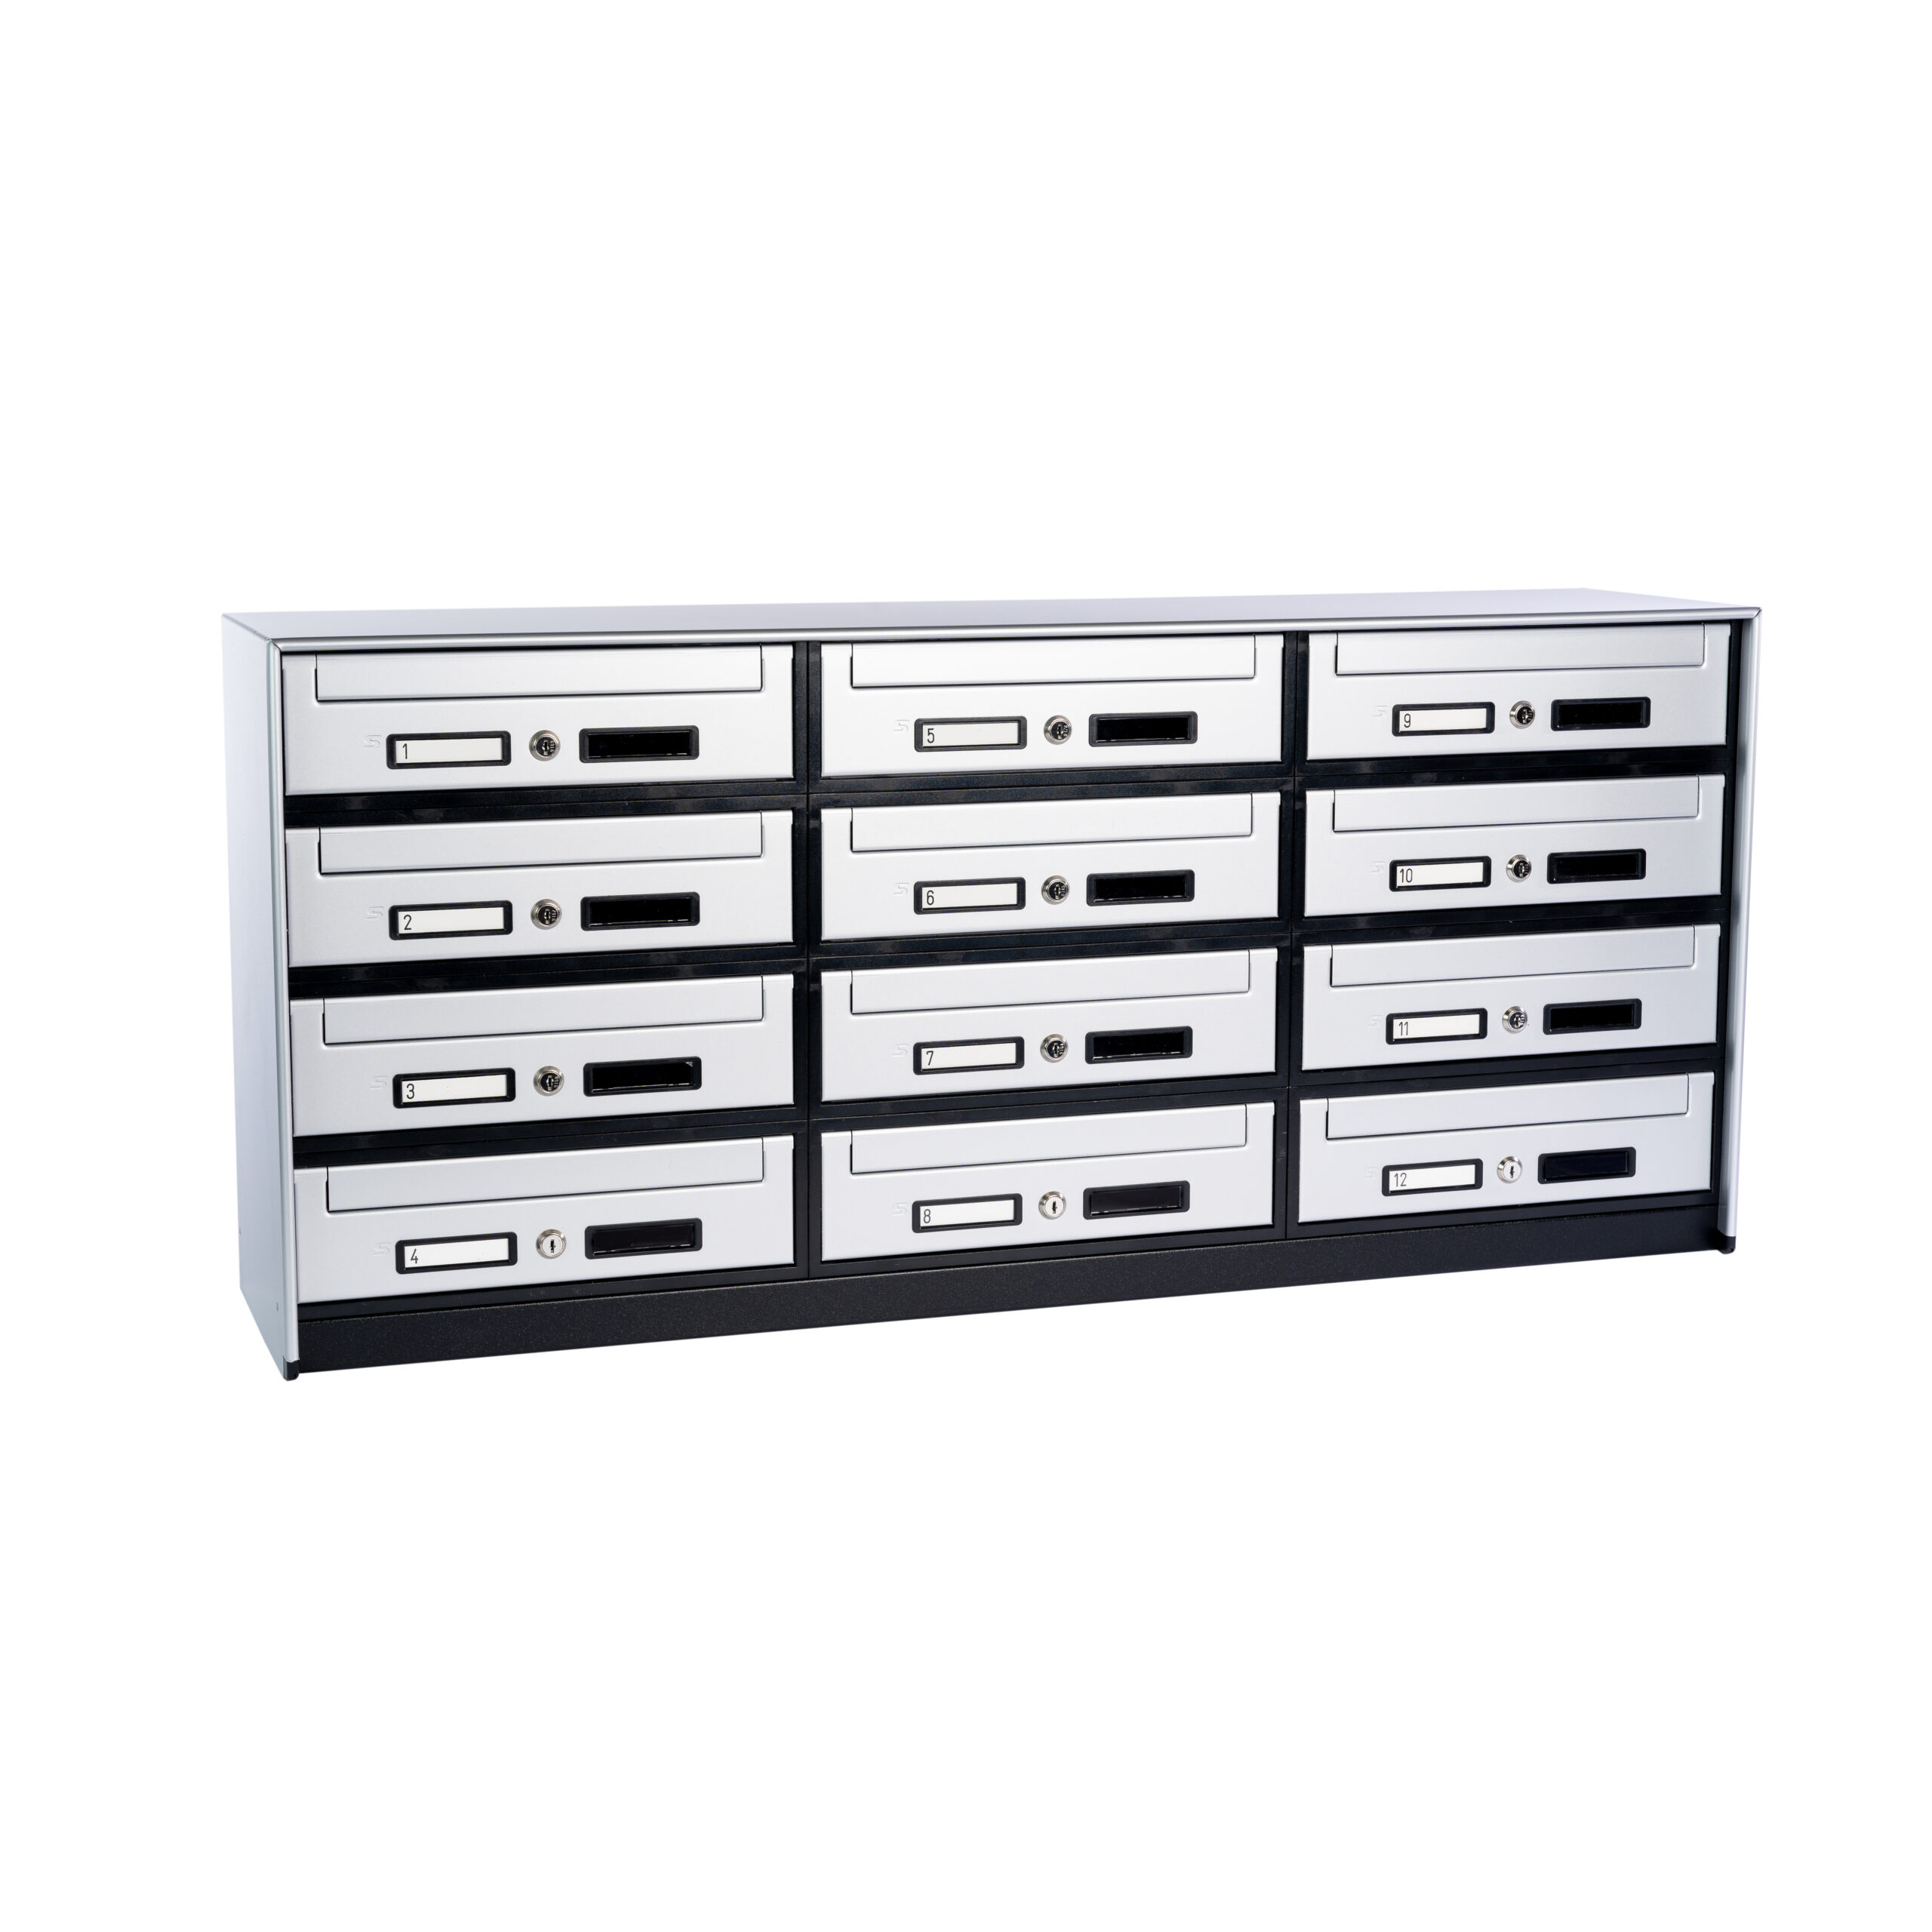 SC5 standard modular letterbox units with front mail collection - 12 mailboxes